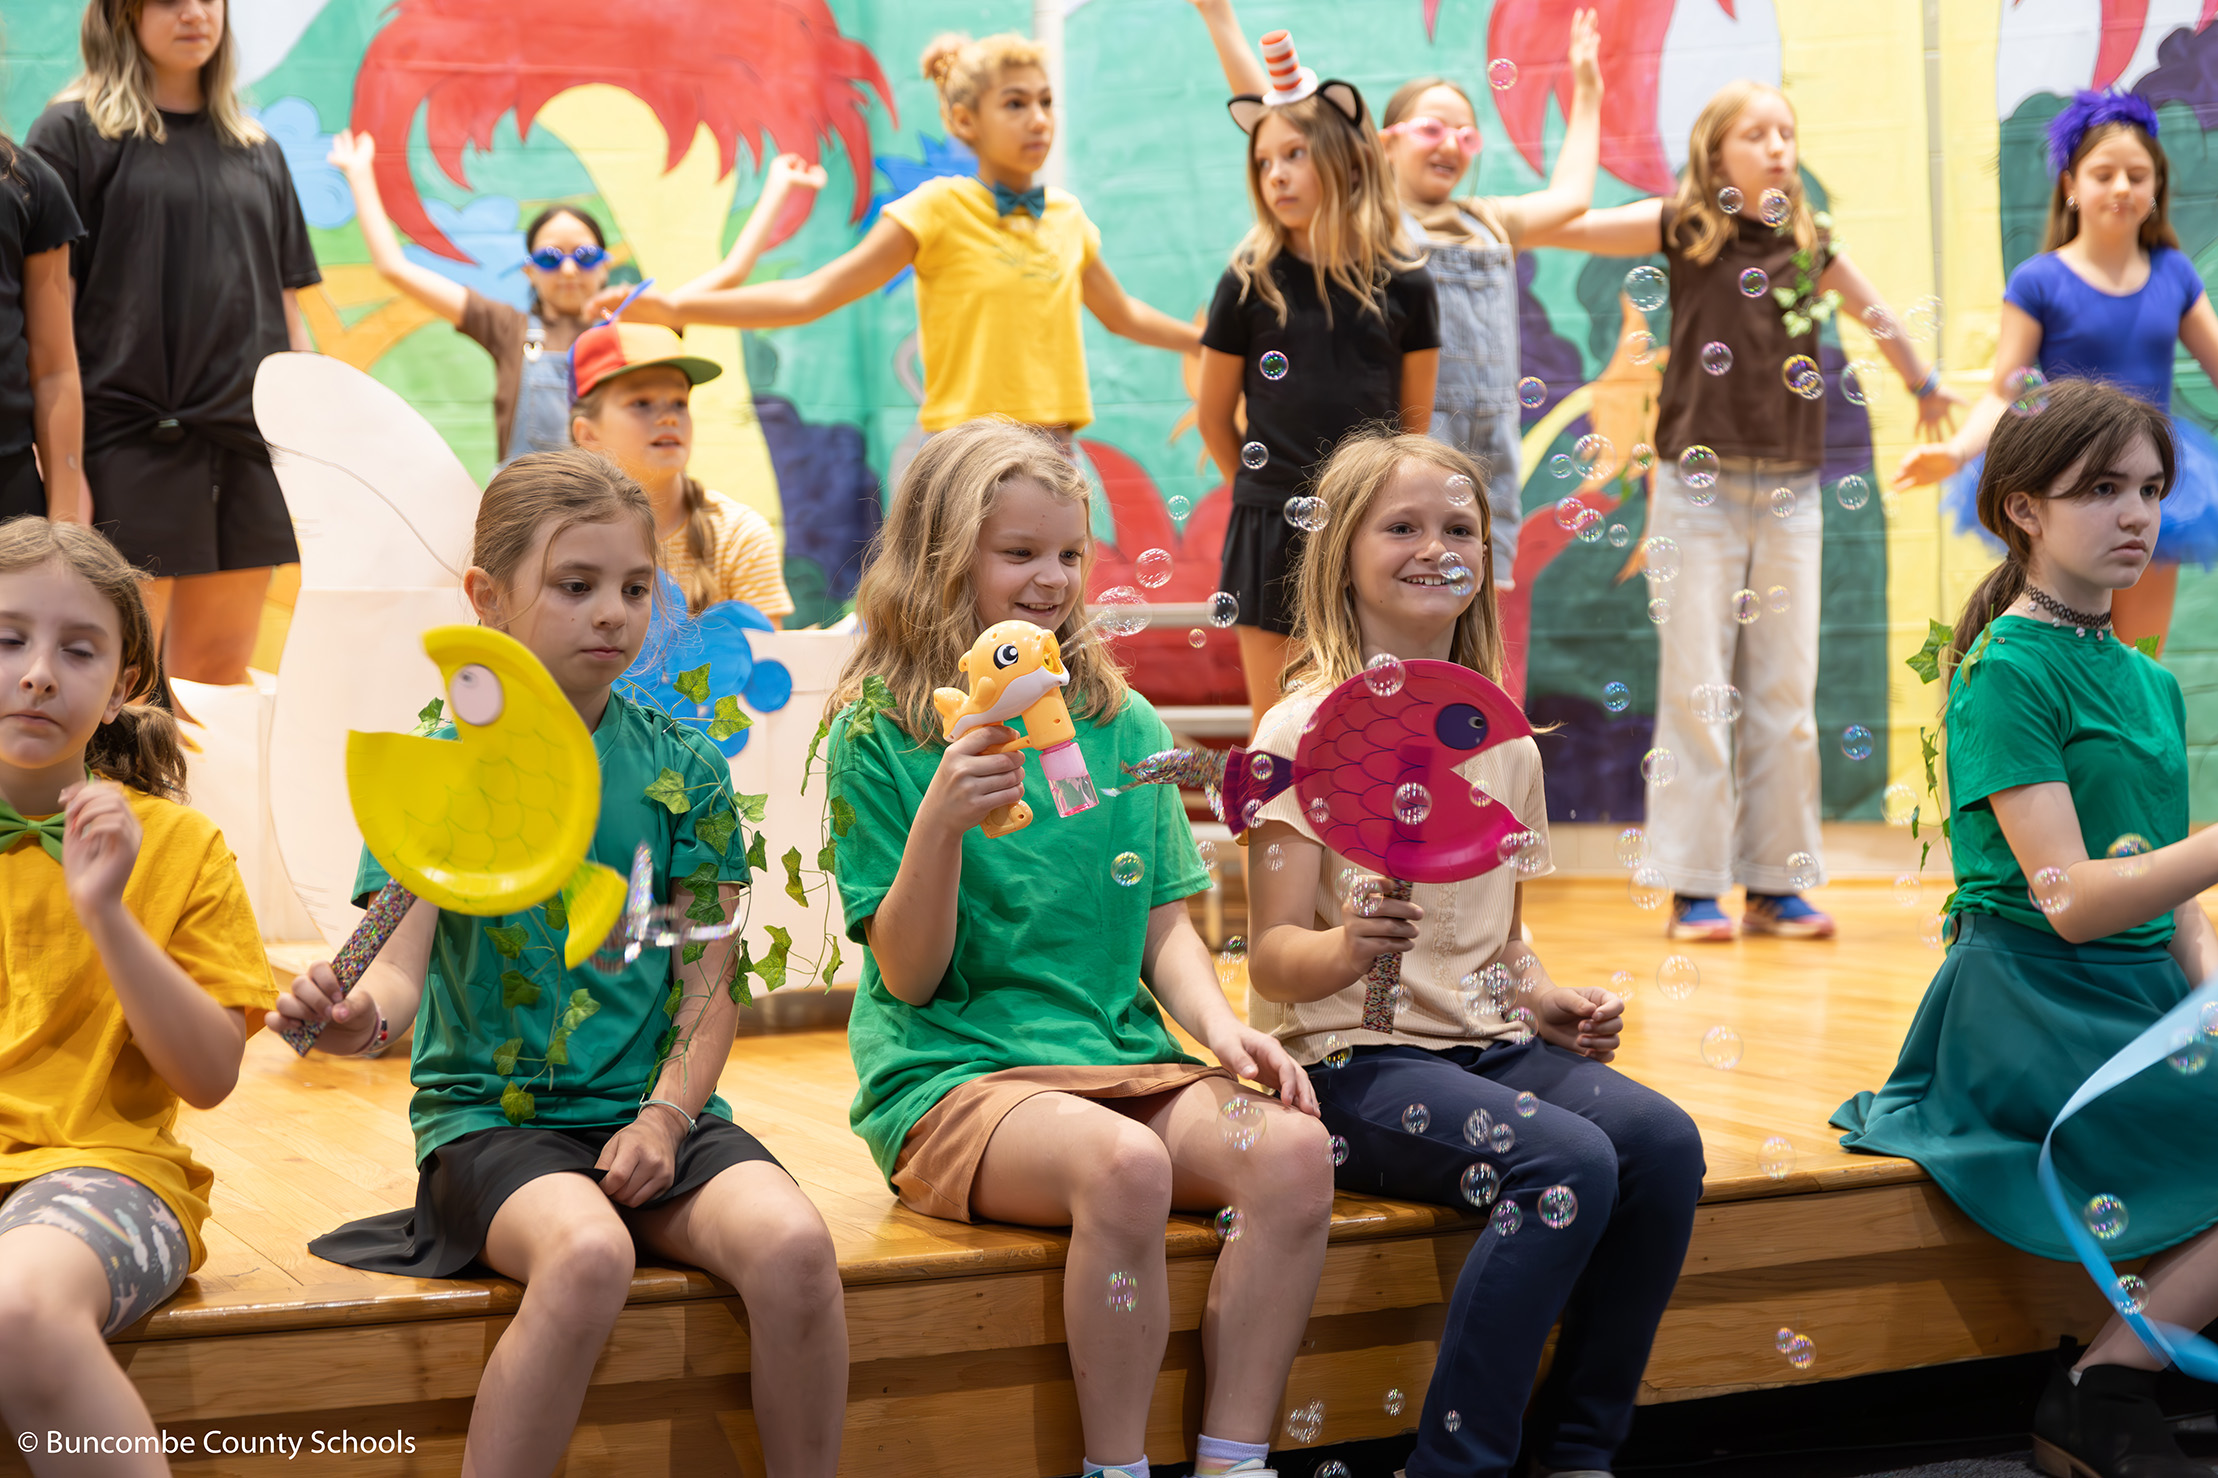 Students singing in the Suesical musical production with bubbles blowing in the air. 